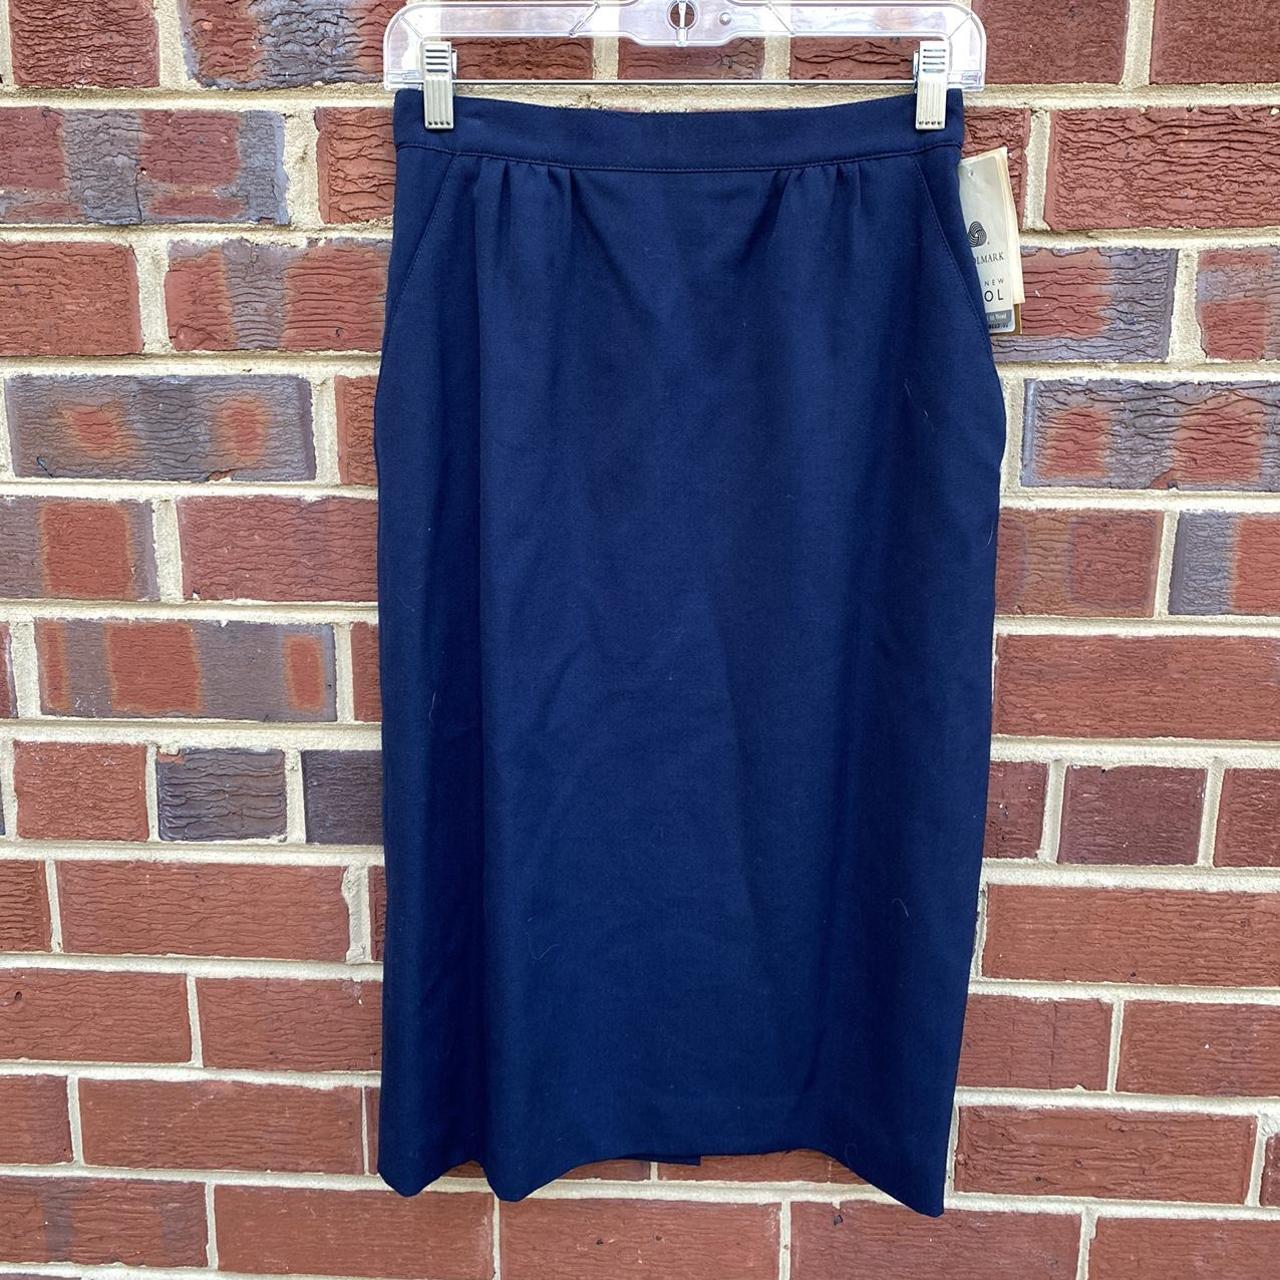 Hawke & Co. Women's Blue and Navy Skirt